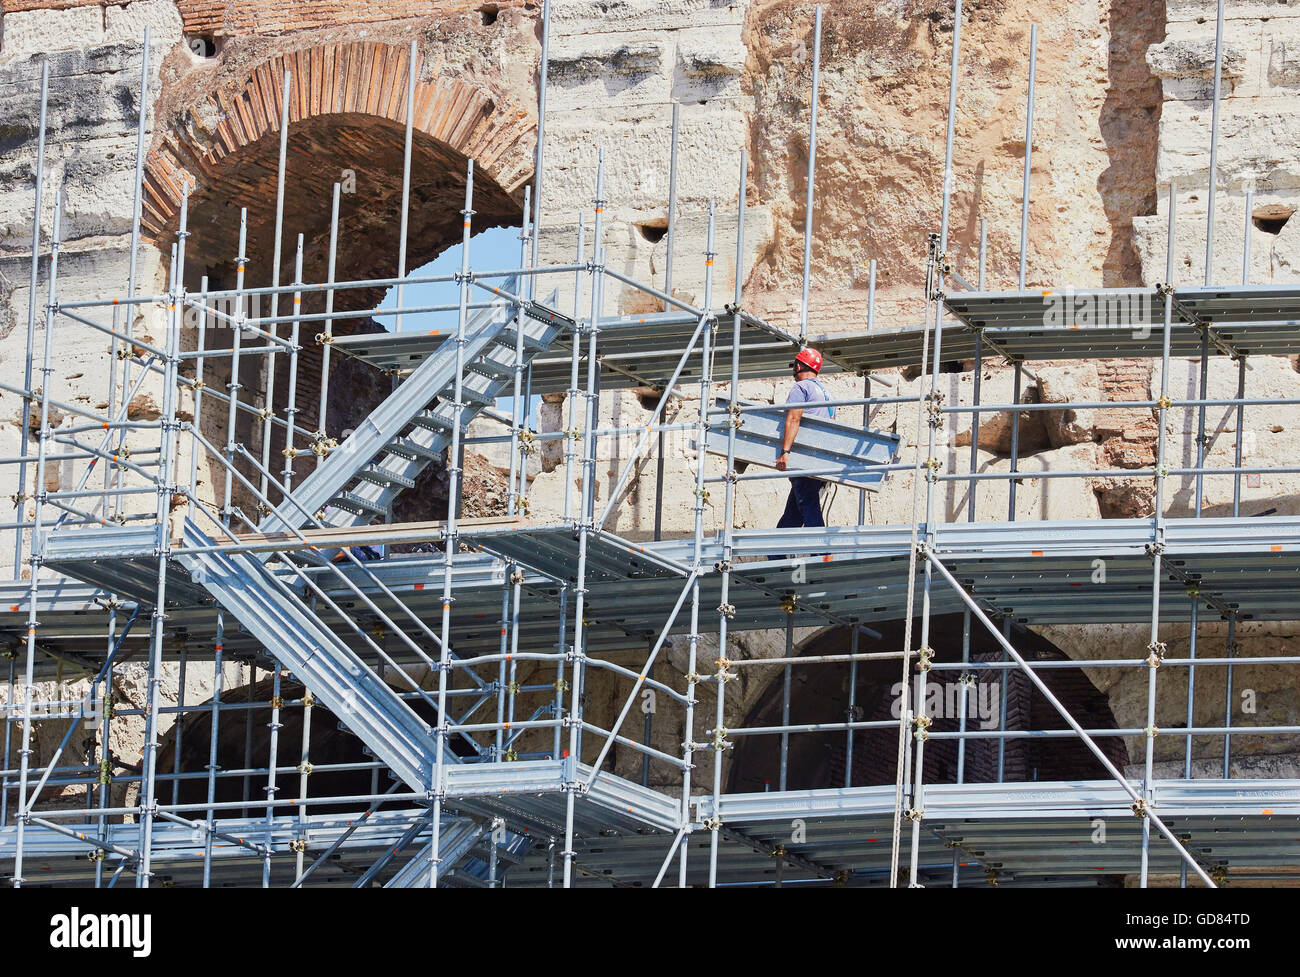 Workman on scaffolding restoring the exterior of the Colosseum Rome Lazio Italy Europe Stock Photo